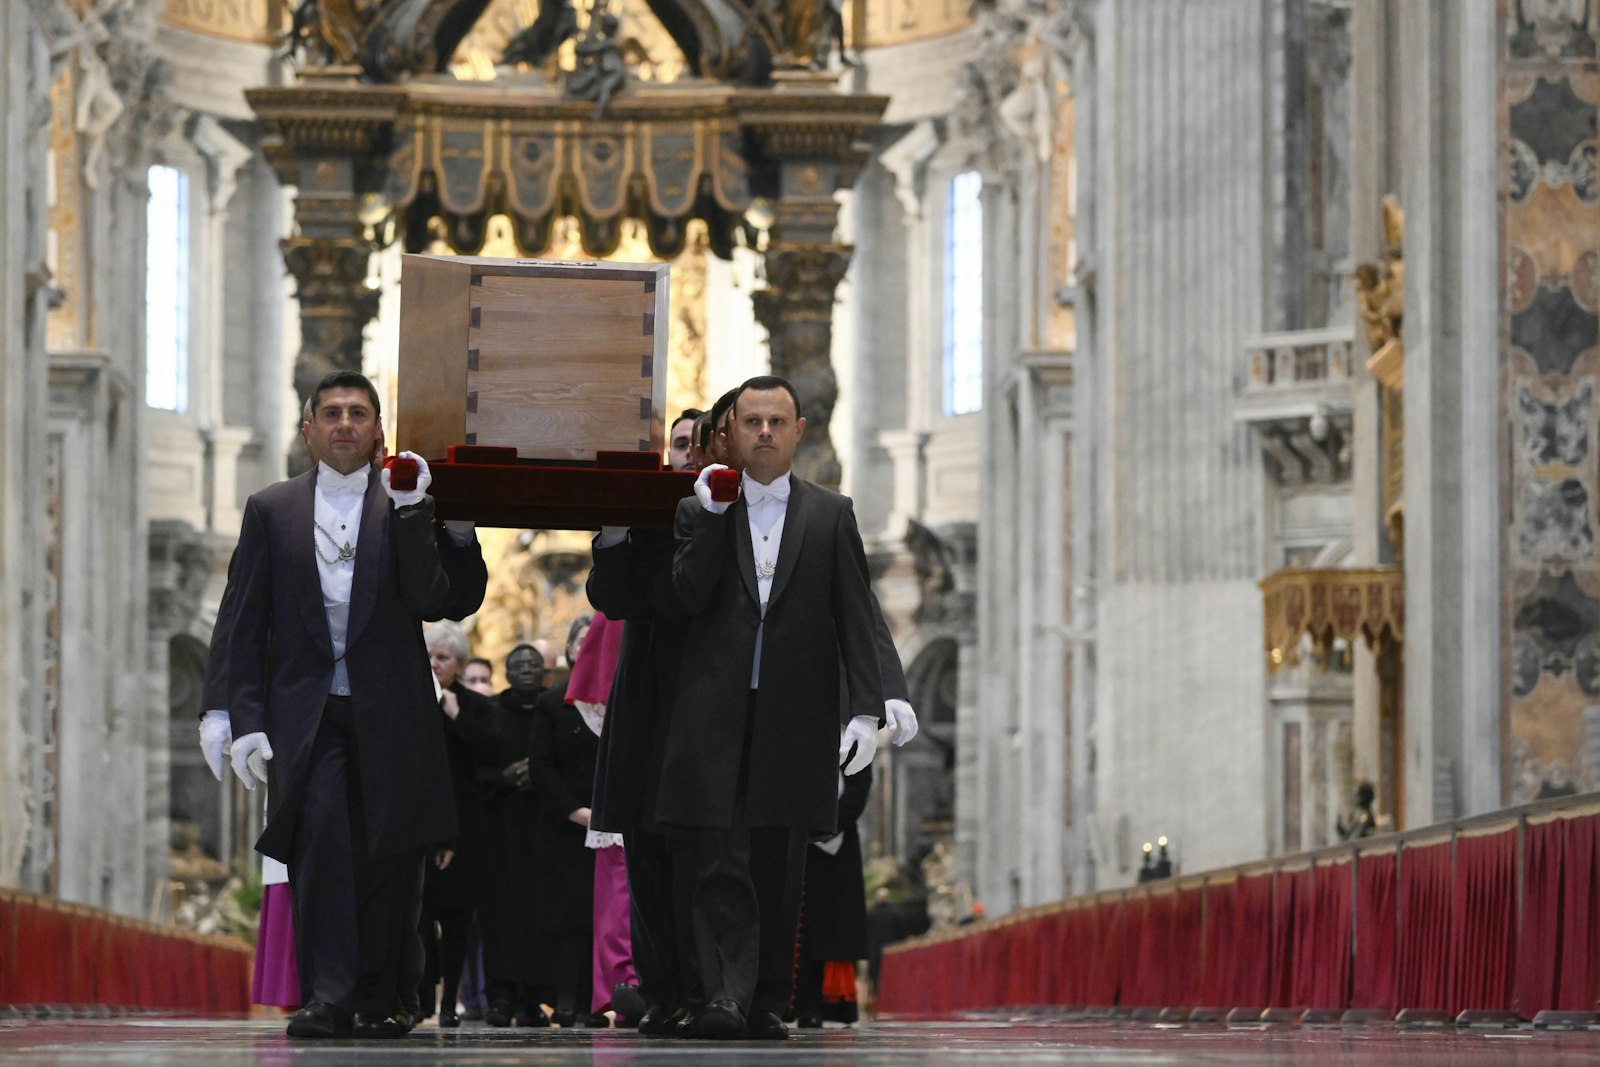 Pallbearers carry the casket of Pope Benedict XVI in St. Peter's Basilica during a procession to St. Peter's Square for the funeral of the late pope at the Vatican Jan. 5, 2023. (CNS photo/Vatican Media)